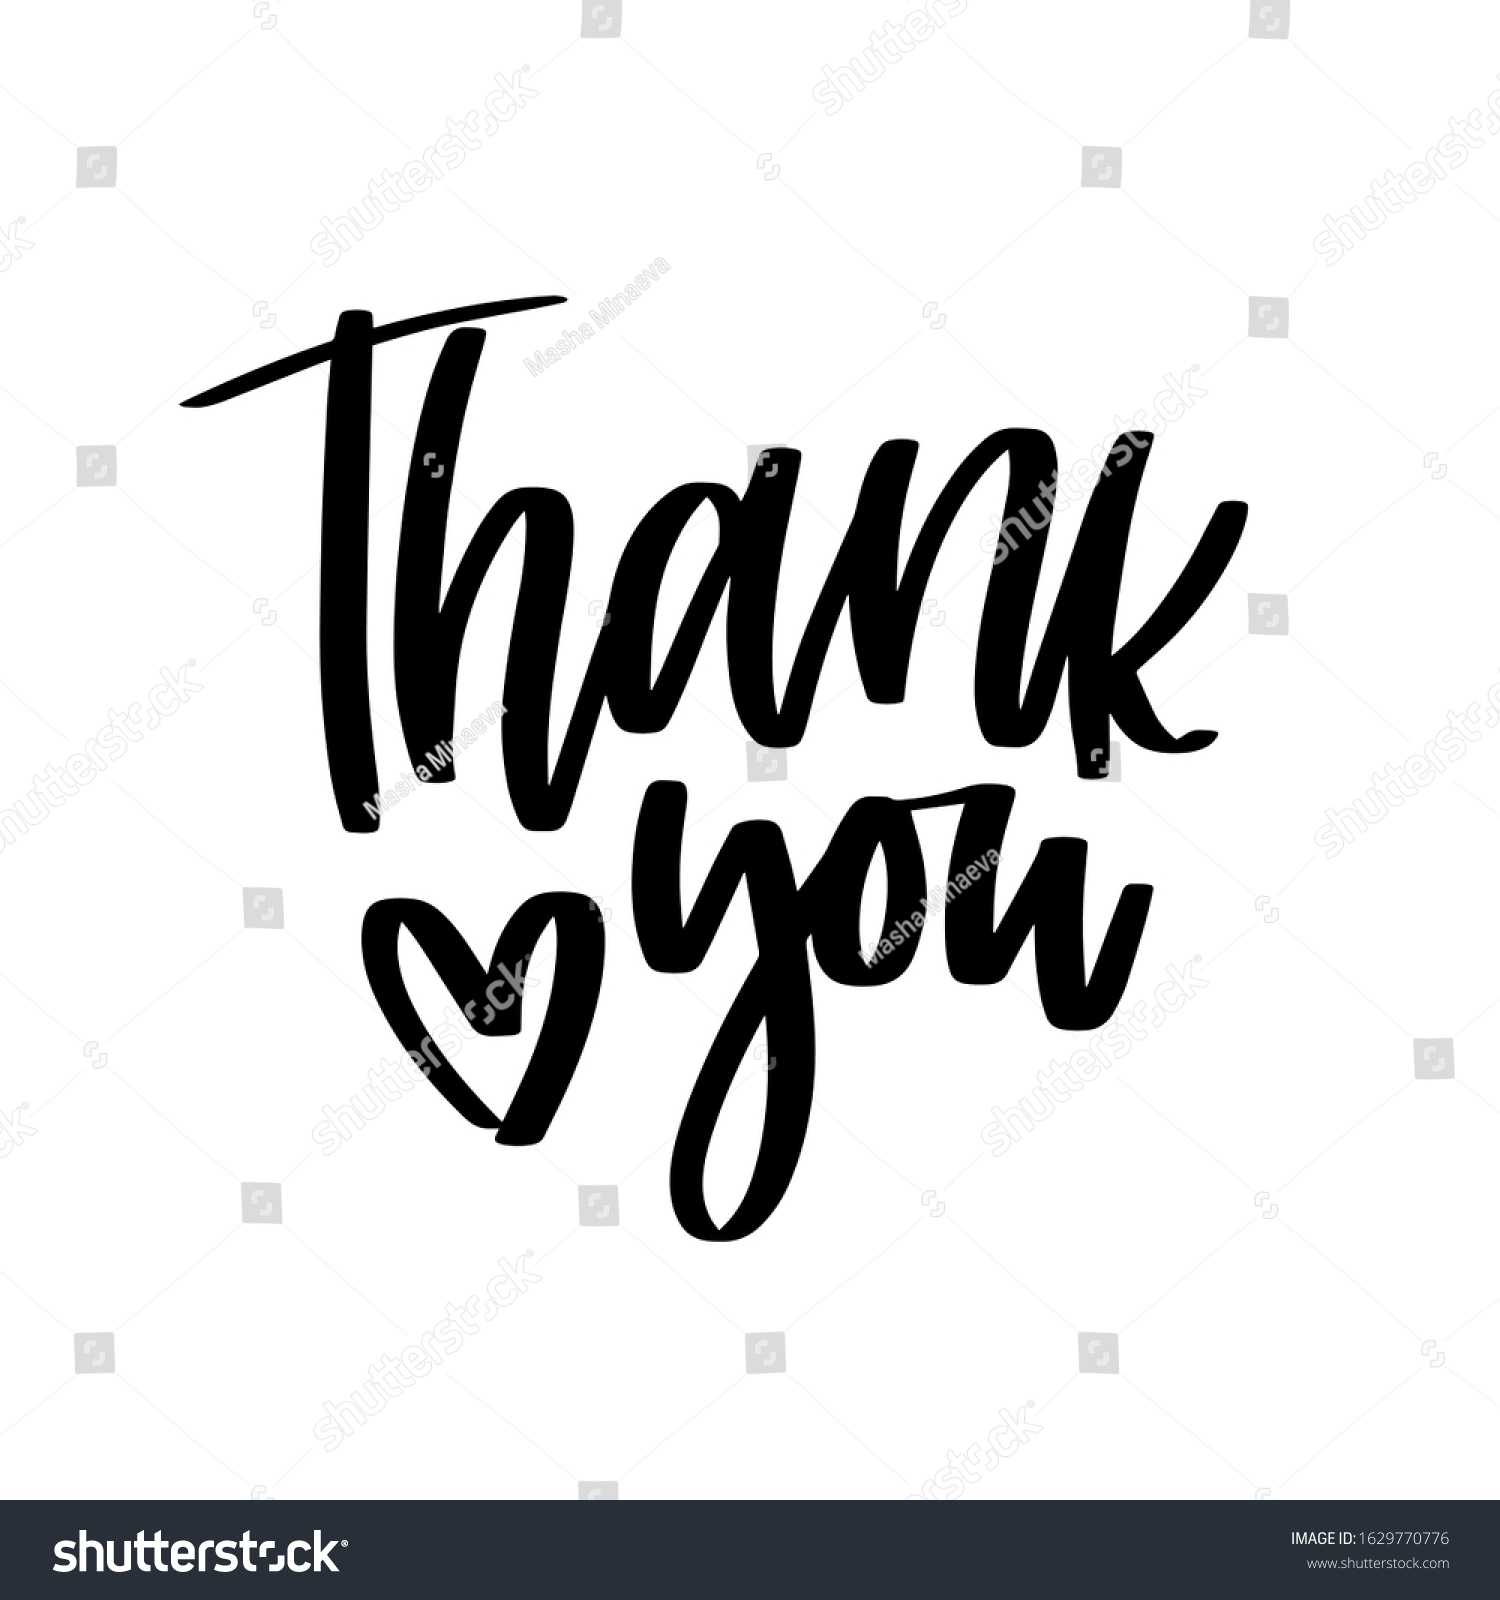 Thank You Typography Text Vector Design Stock Vector (Royalty Free ...